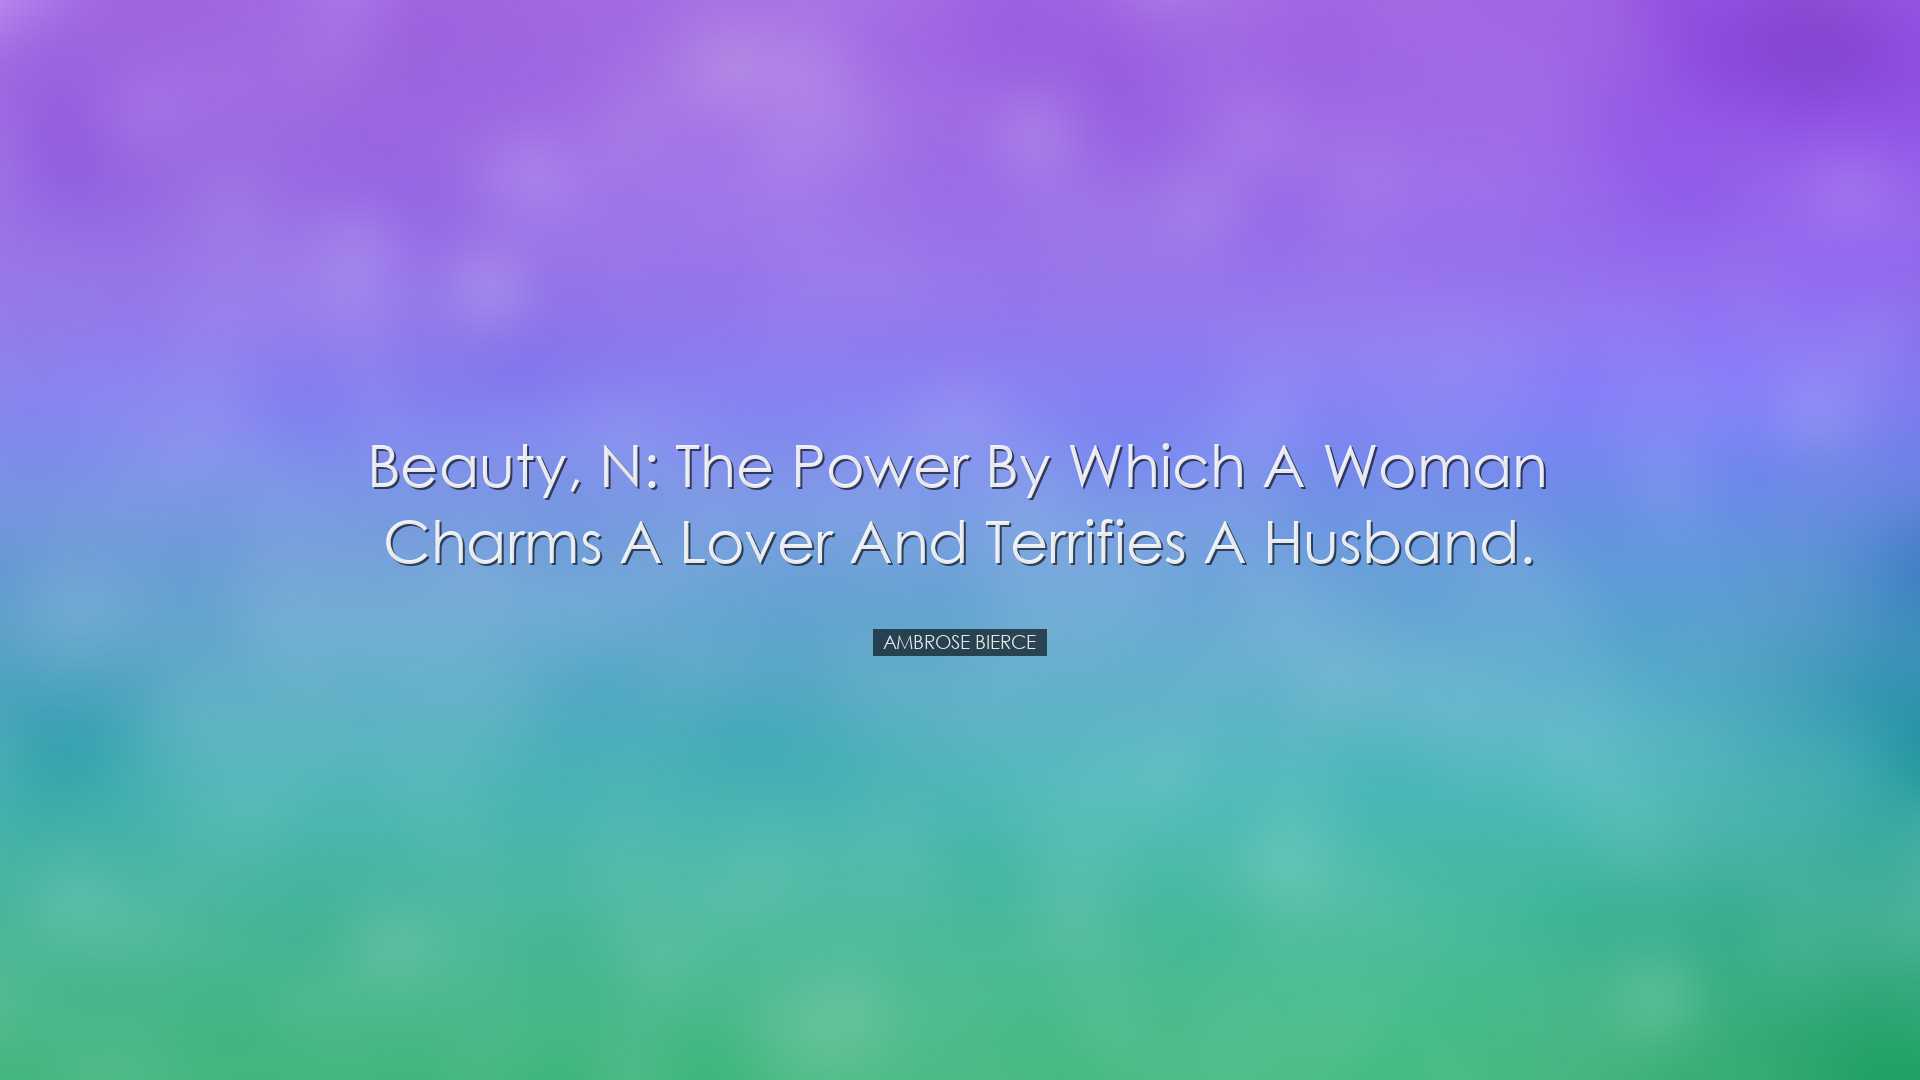 Beauty, n: the power by which a woman charms a lover and terrifies